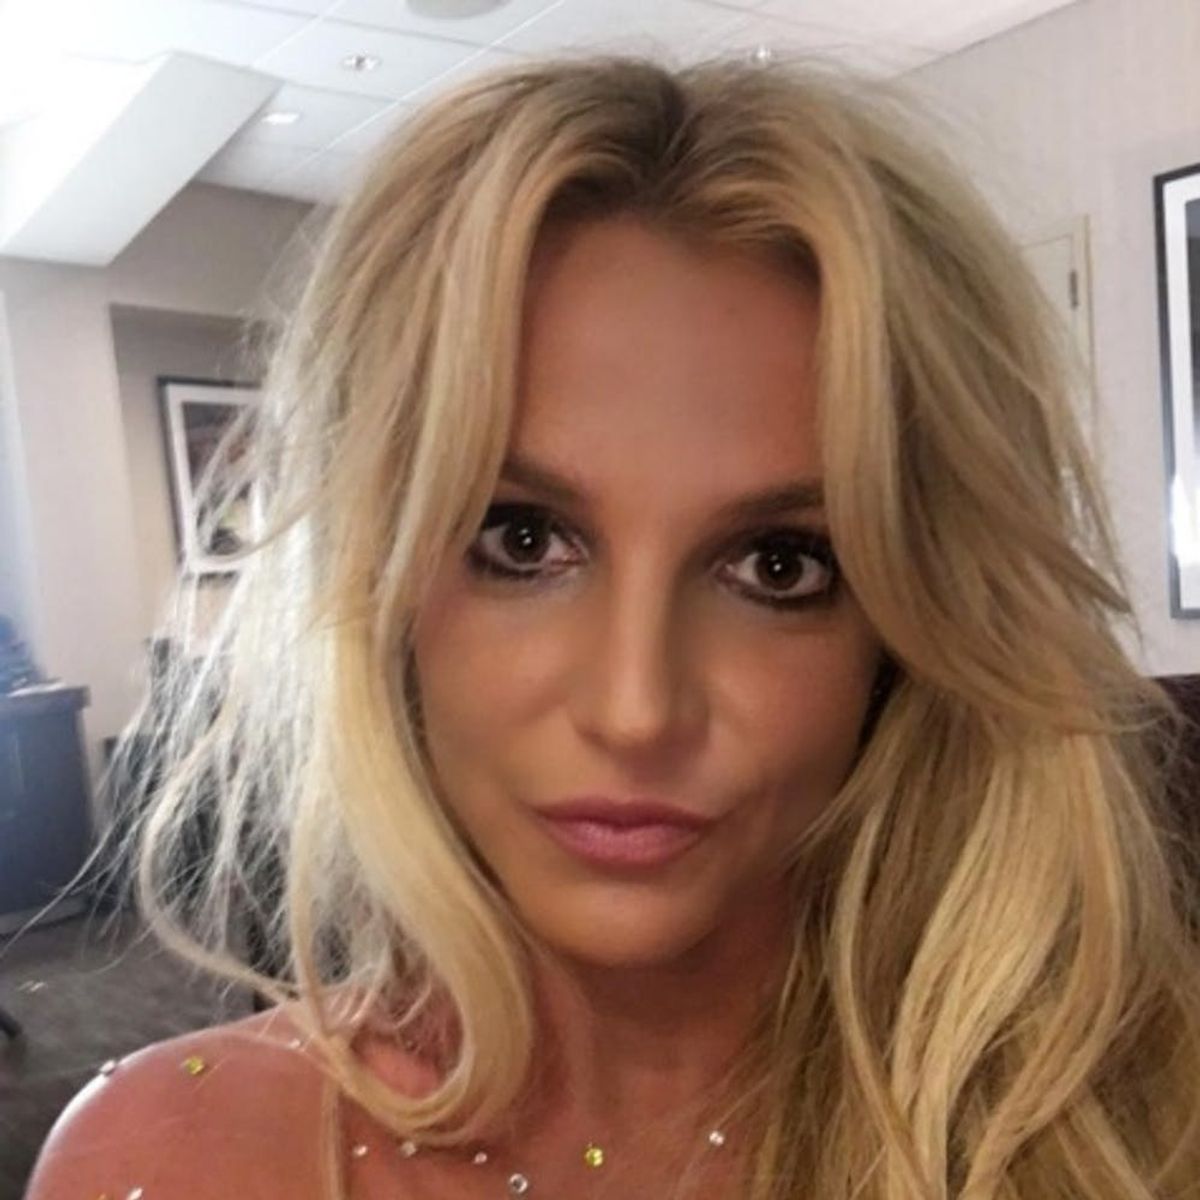 Everything You Need to Know About the Controversial Britney Spears Biopic